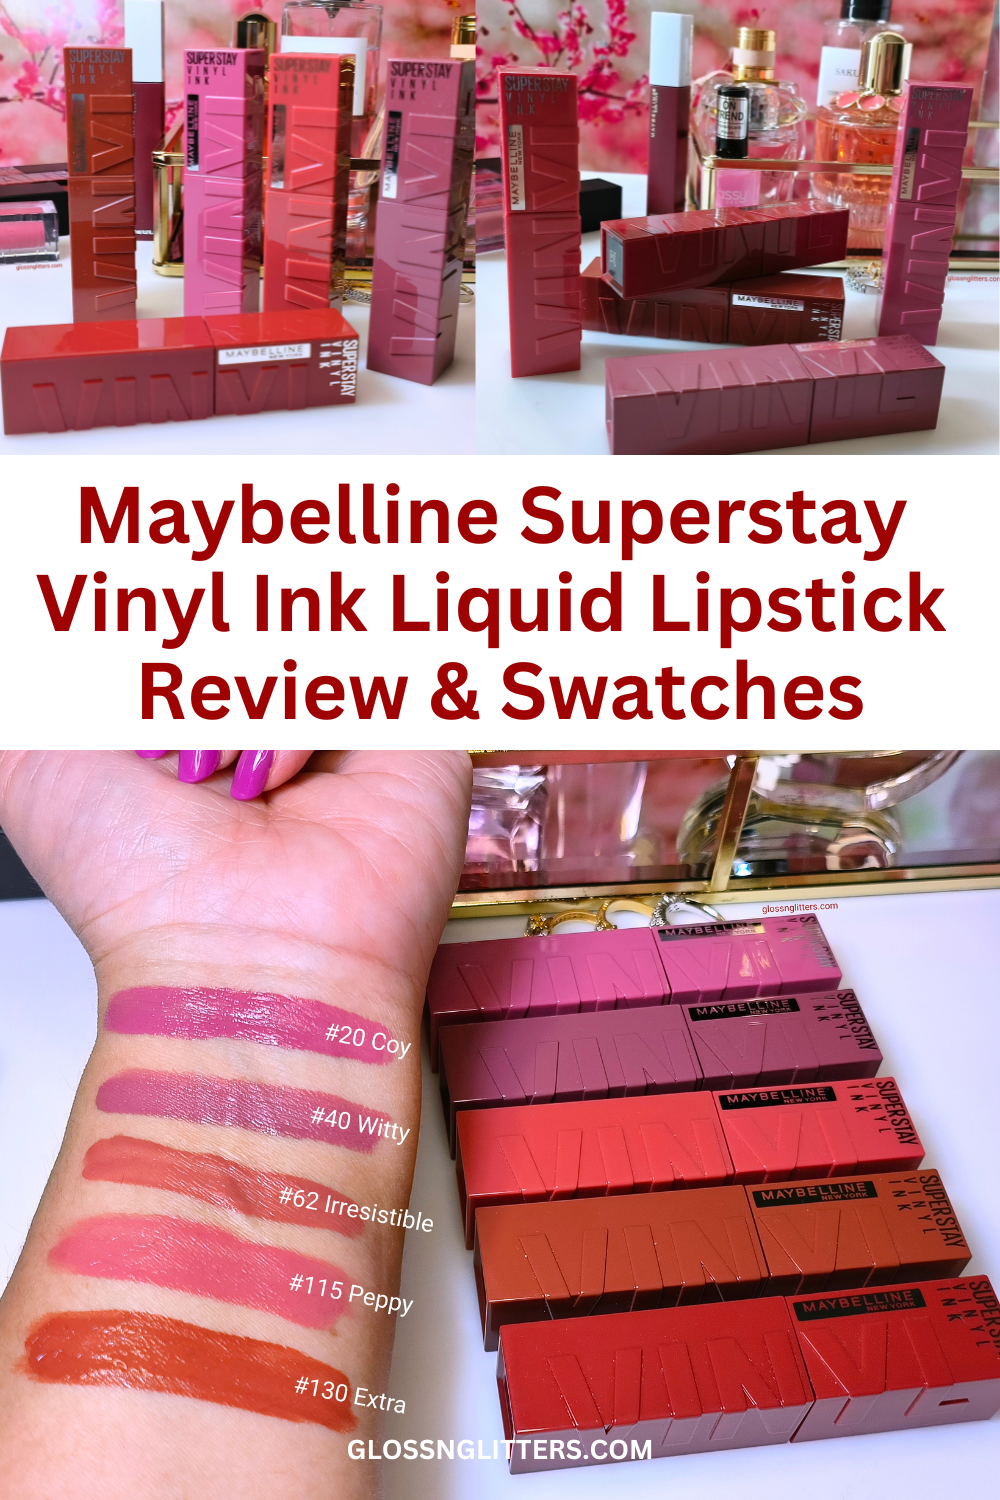 Maybelline Superstay Vinyl Ink Review